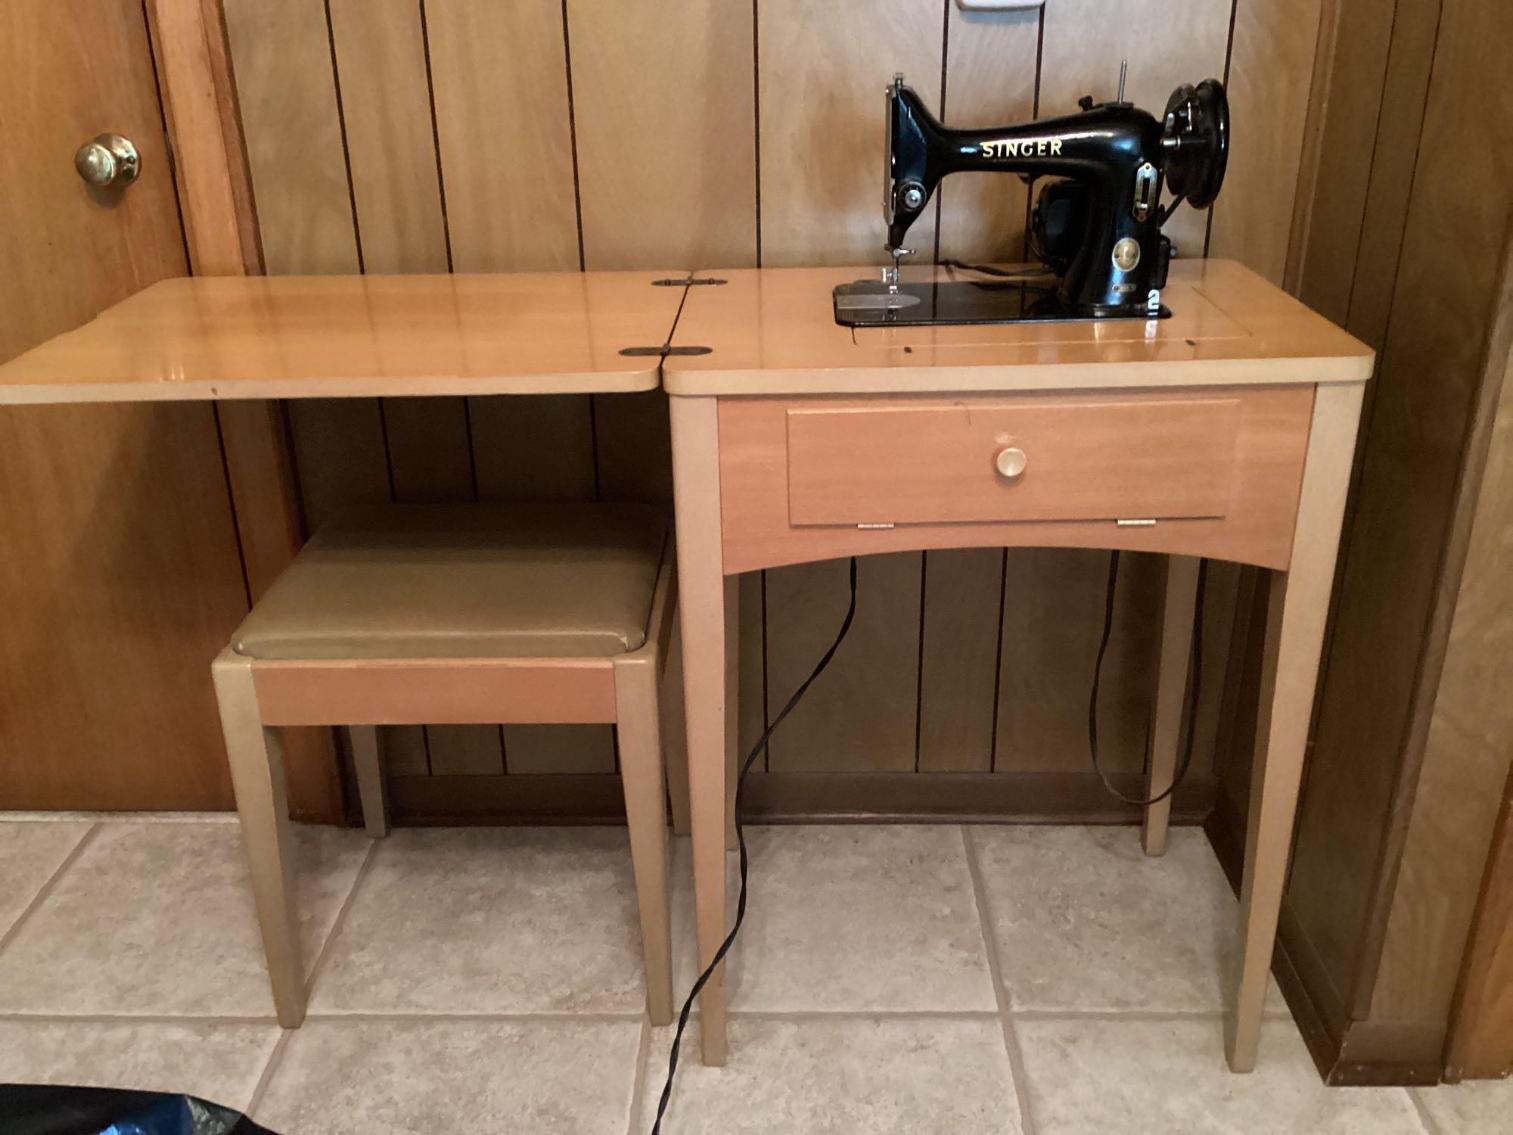 Image for Singer Sewing Machine in Cabinet 